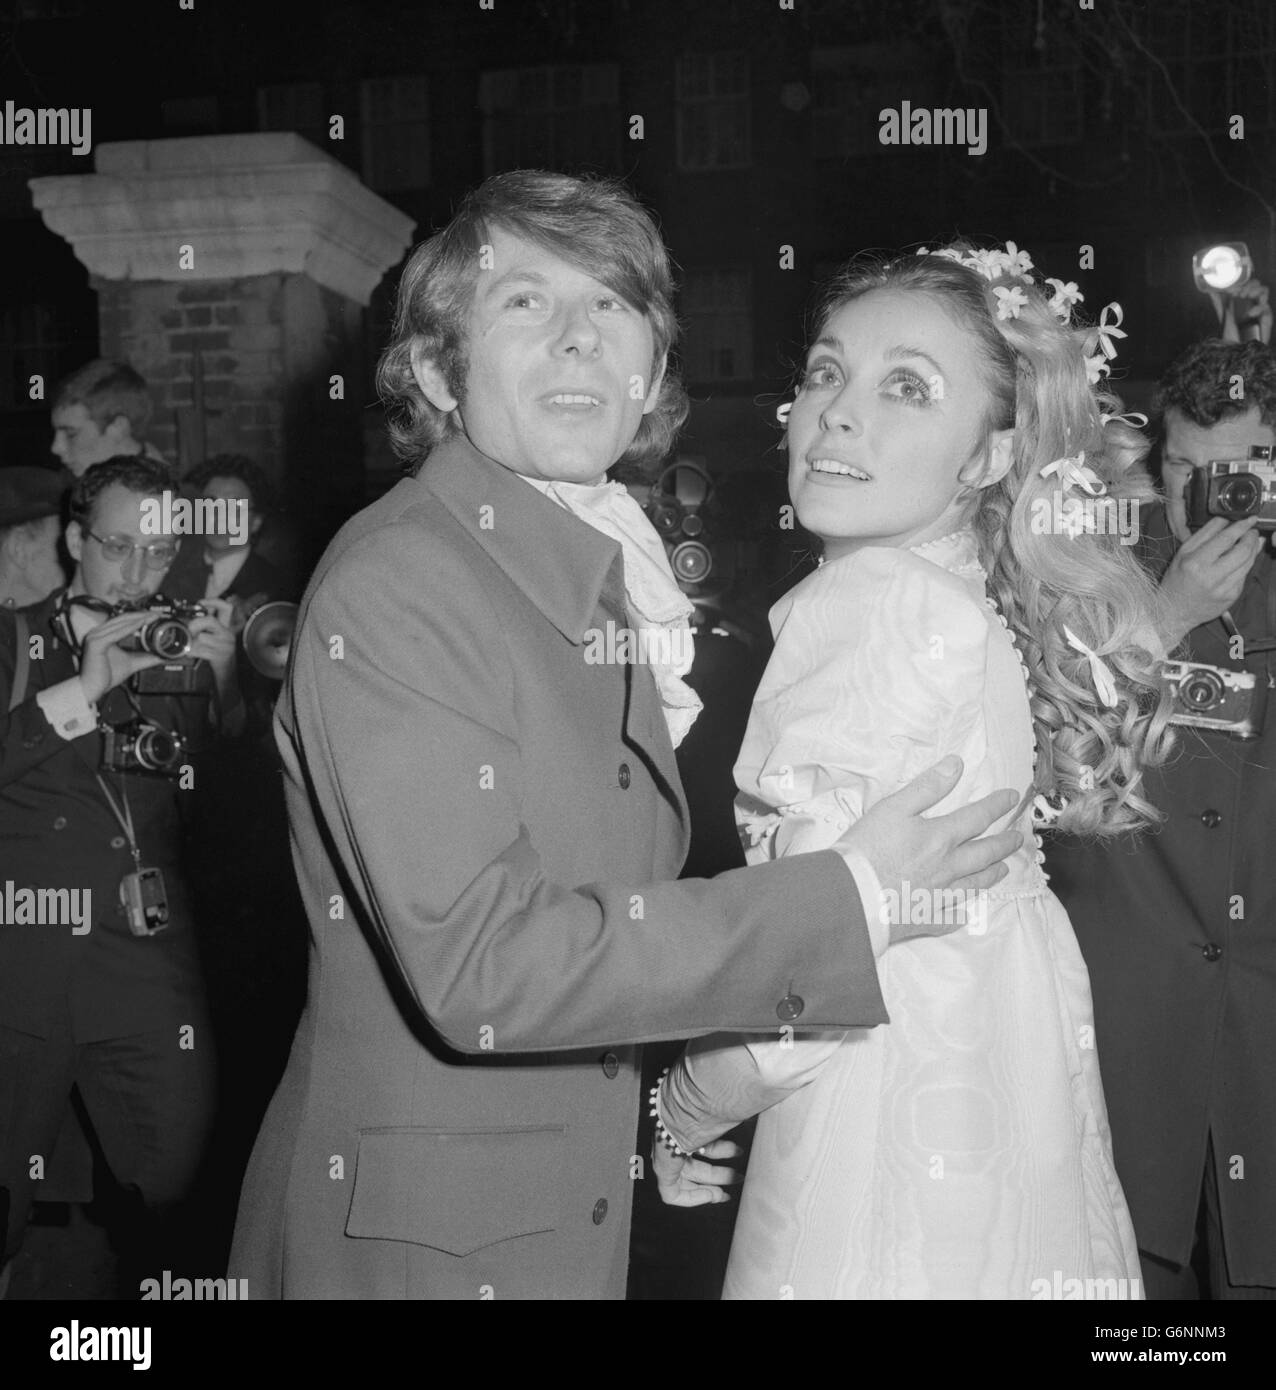 Actress Sharon Tate, 25, star of the film Valley of the Dolls, and her bridegroom, film director Roman Polanski after their wedding at Chelsea Register Office in London. Sharon wore a mini-dress of Victorian taffeta. Stock Photo